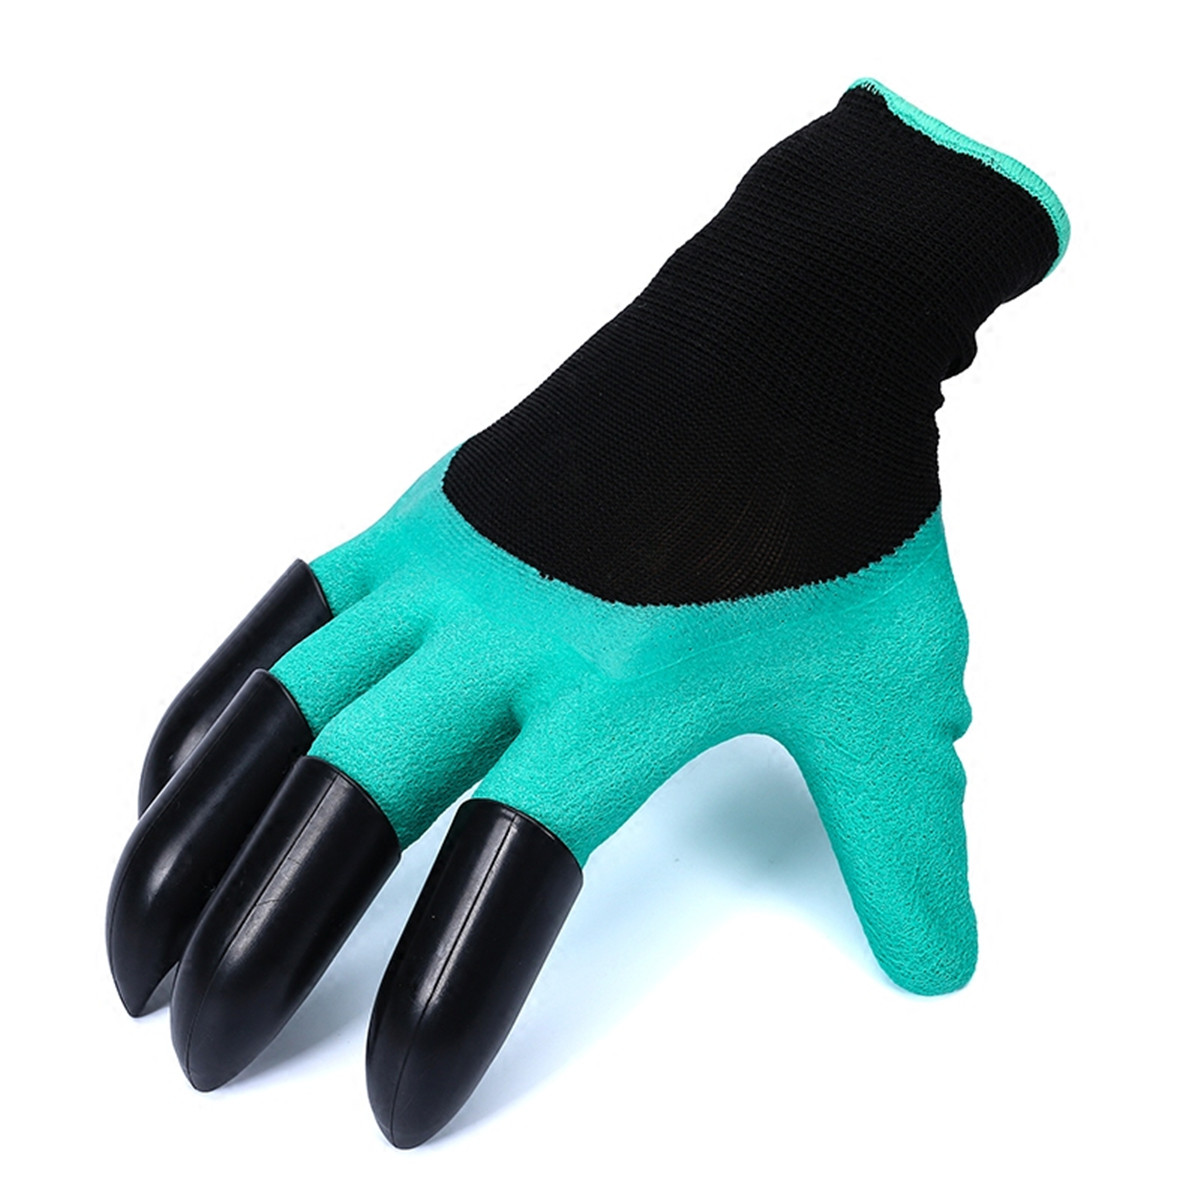 1-Pair-Safety-Gloves-Garden-Gloves-Rubber-TPR-Thermo-Plastic-Builders-Work-ABS-Plastic-Claws-1193187